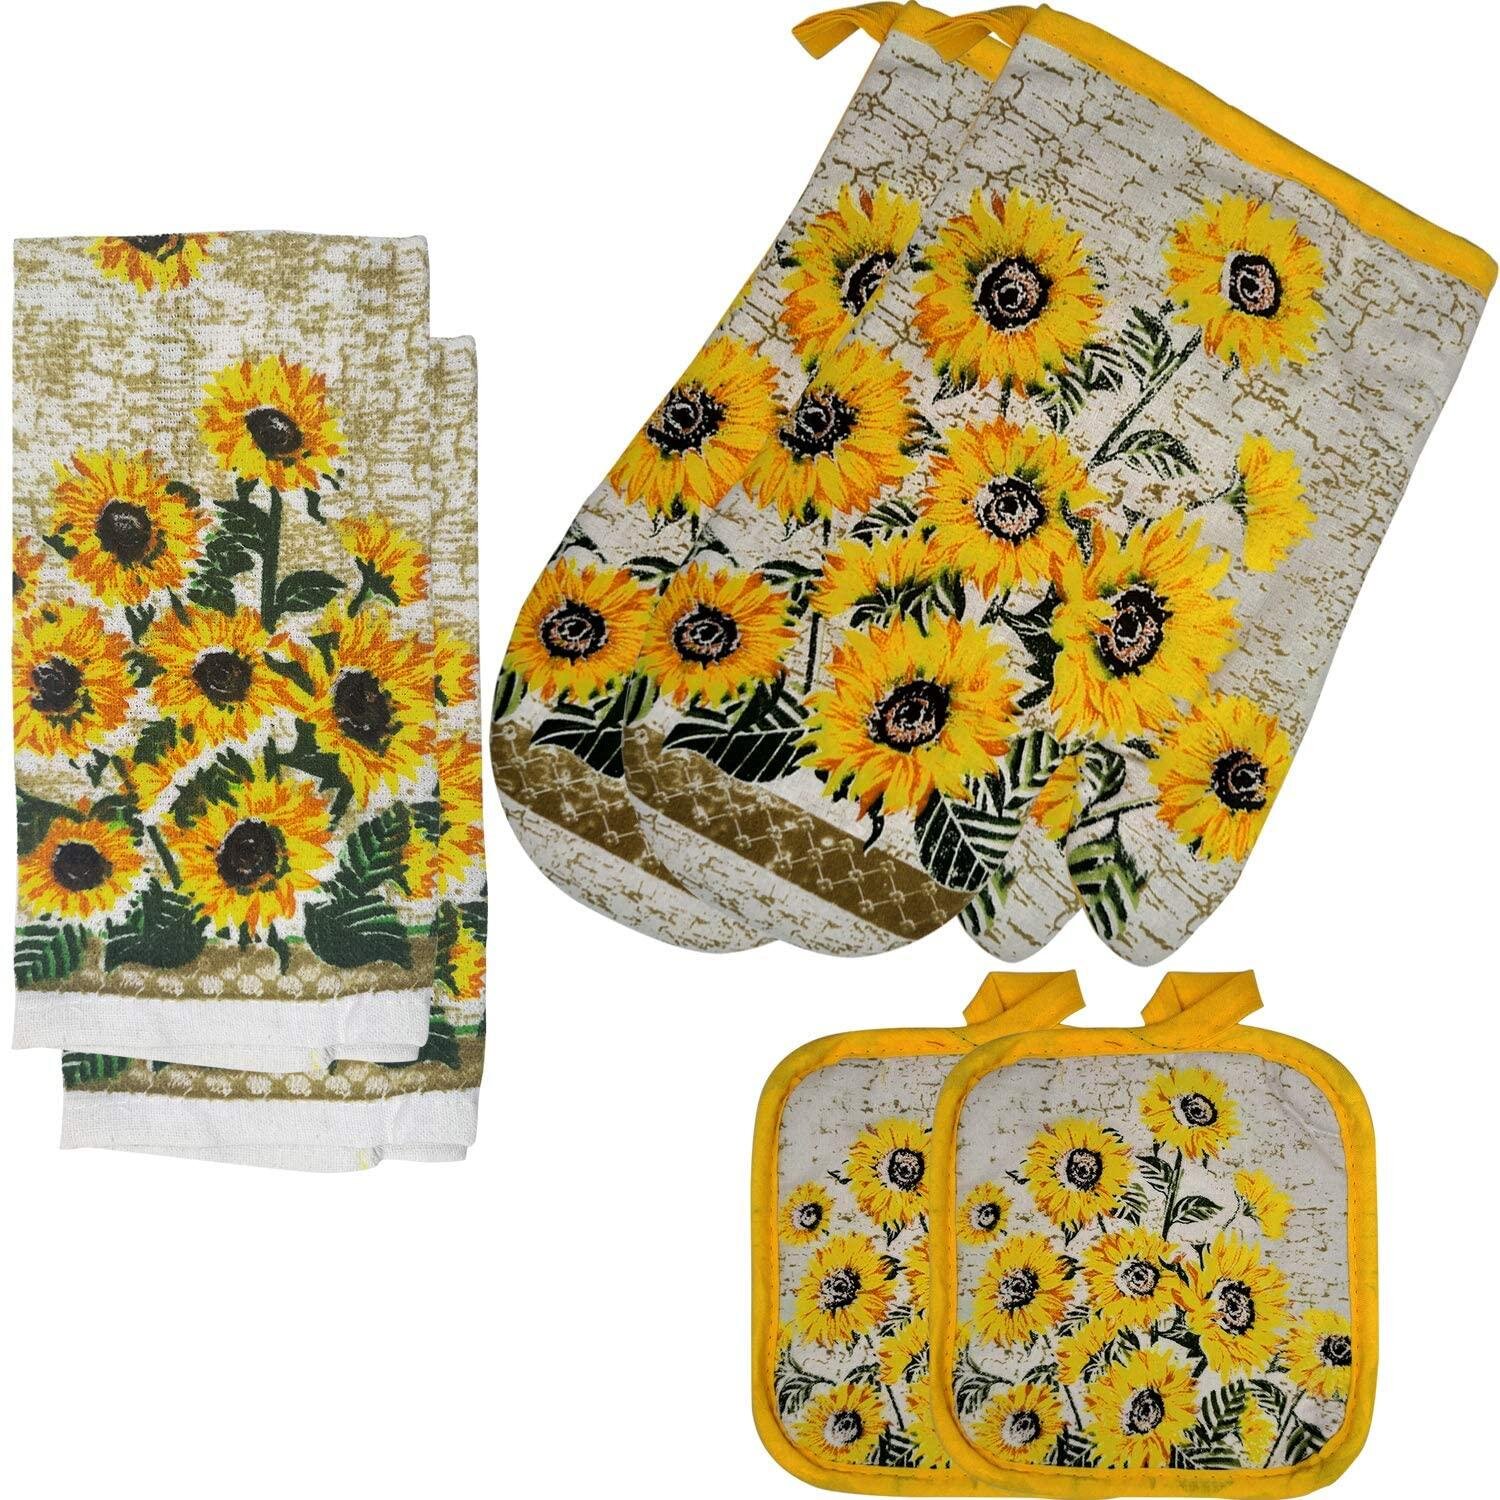 ROOSTER & SUNFLOWERS 5 pc KITCHEN SET 2 POT HOLDERS,2 TOWELS & 1 OVEN MITT SL 